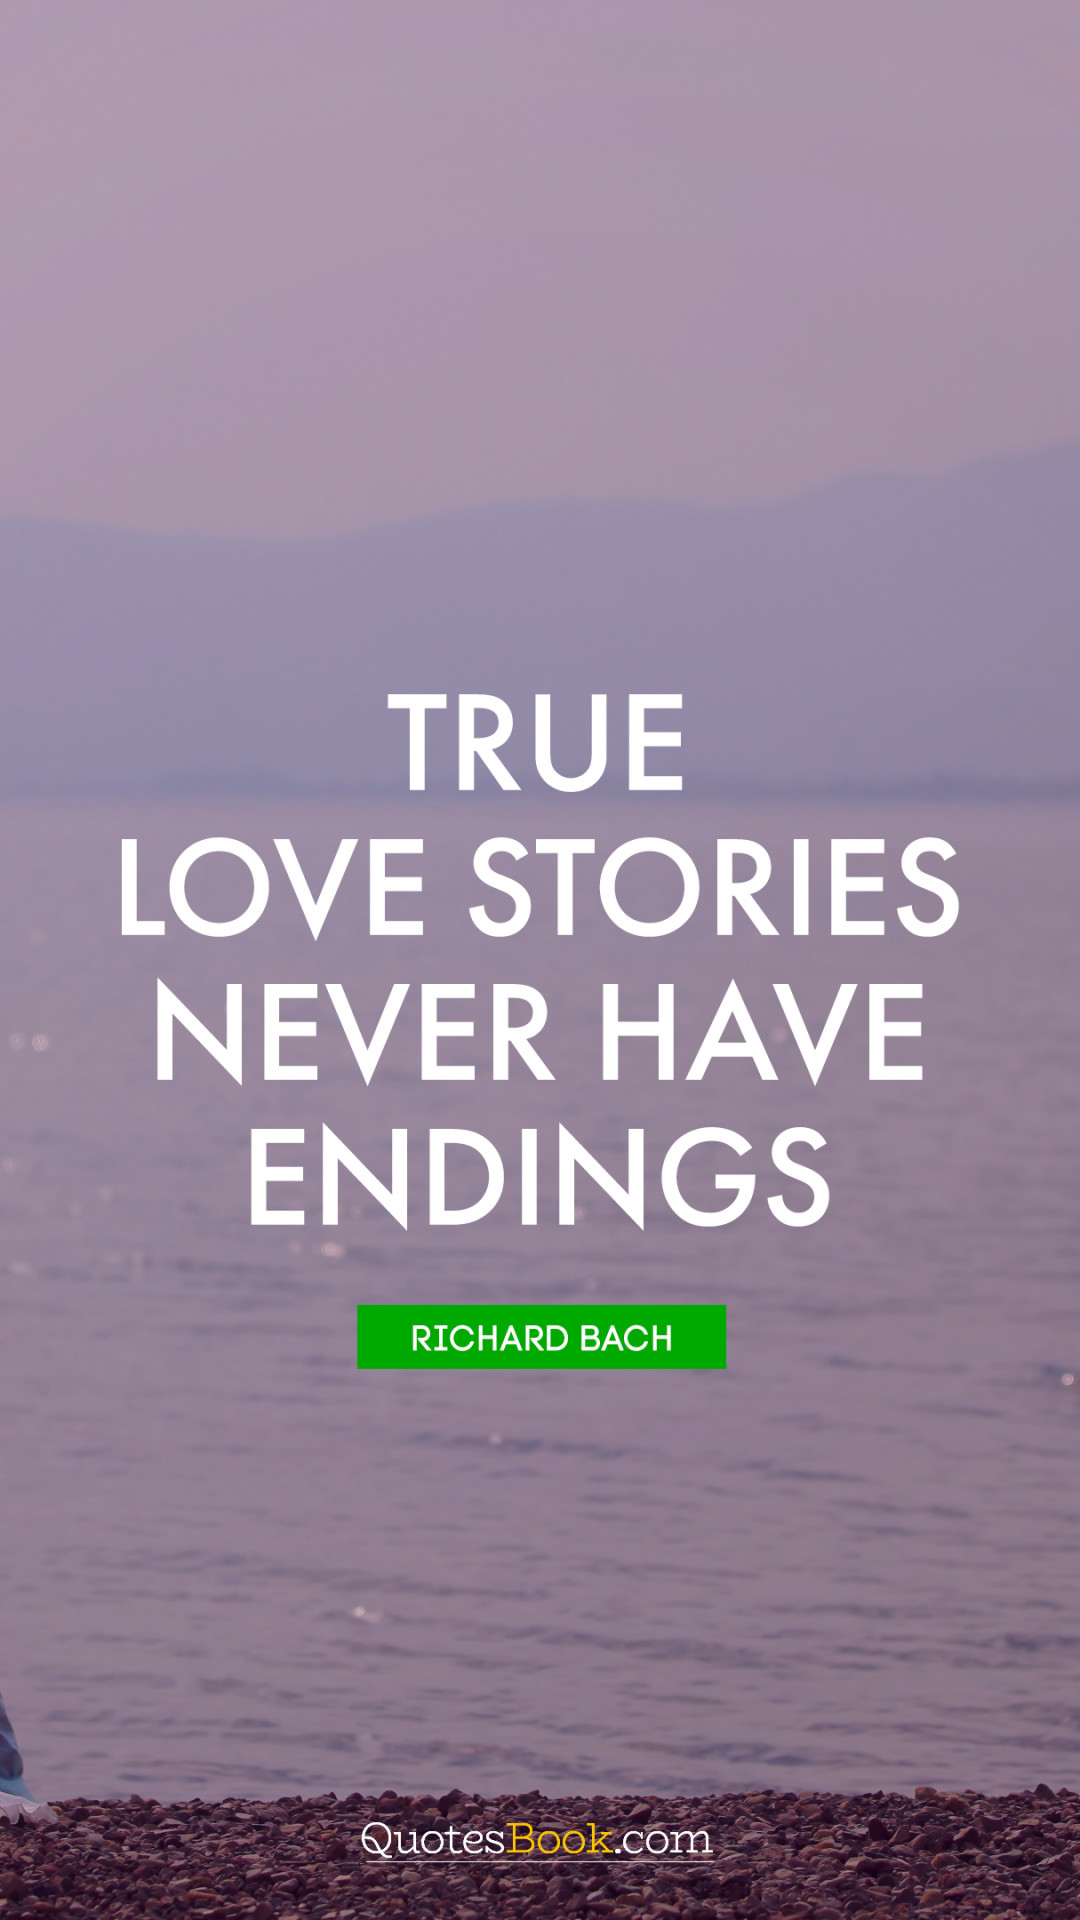 True love stories never have endings. - Quote by Richard Bach - QuotesBook